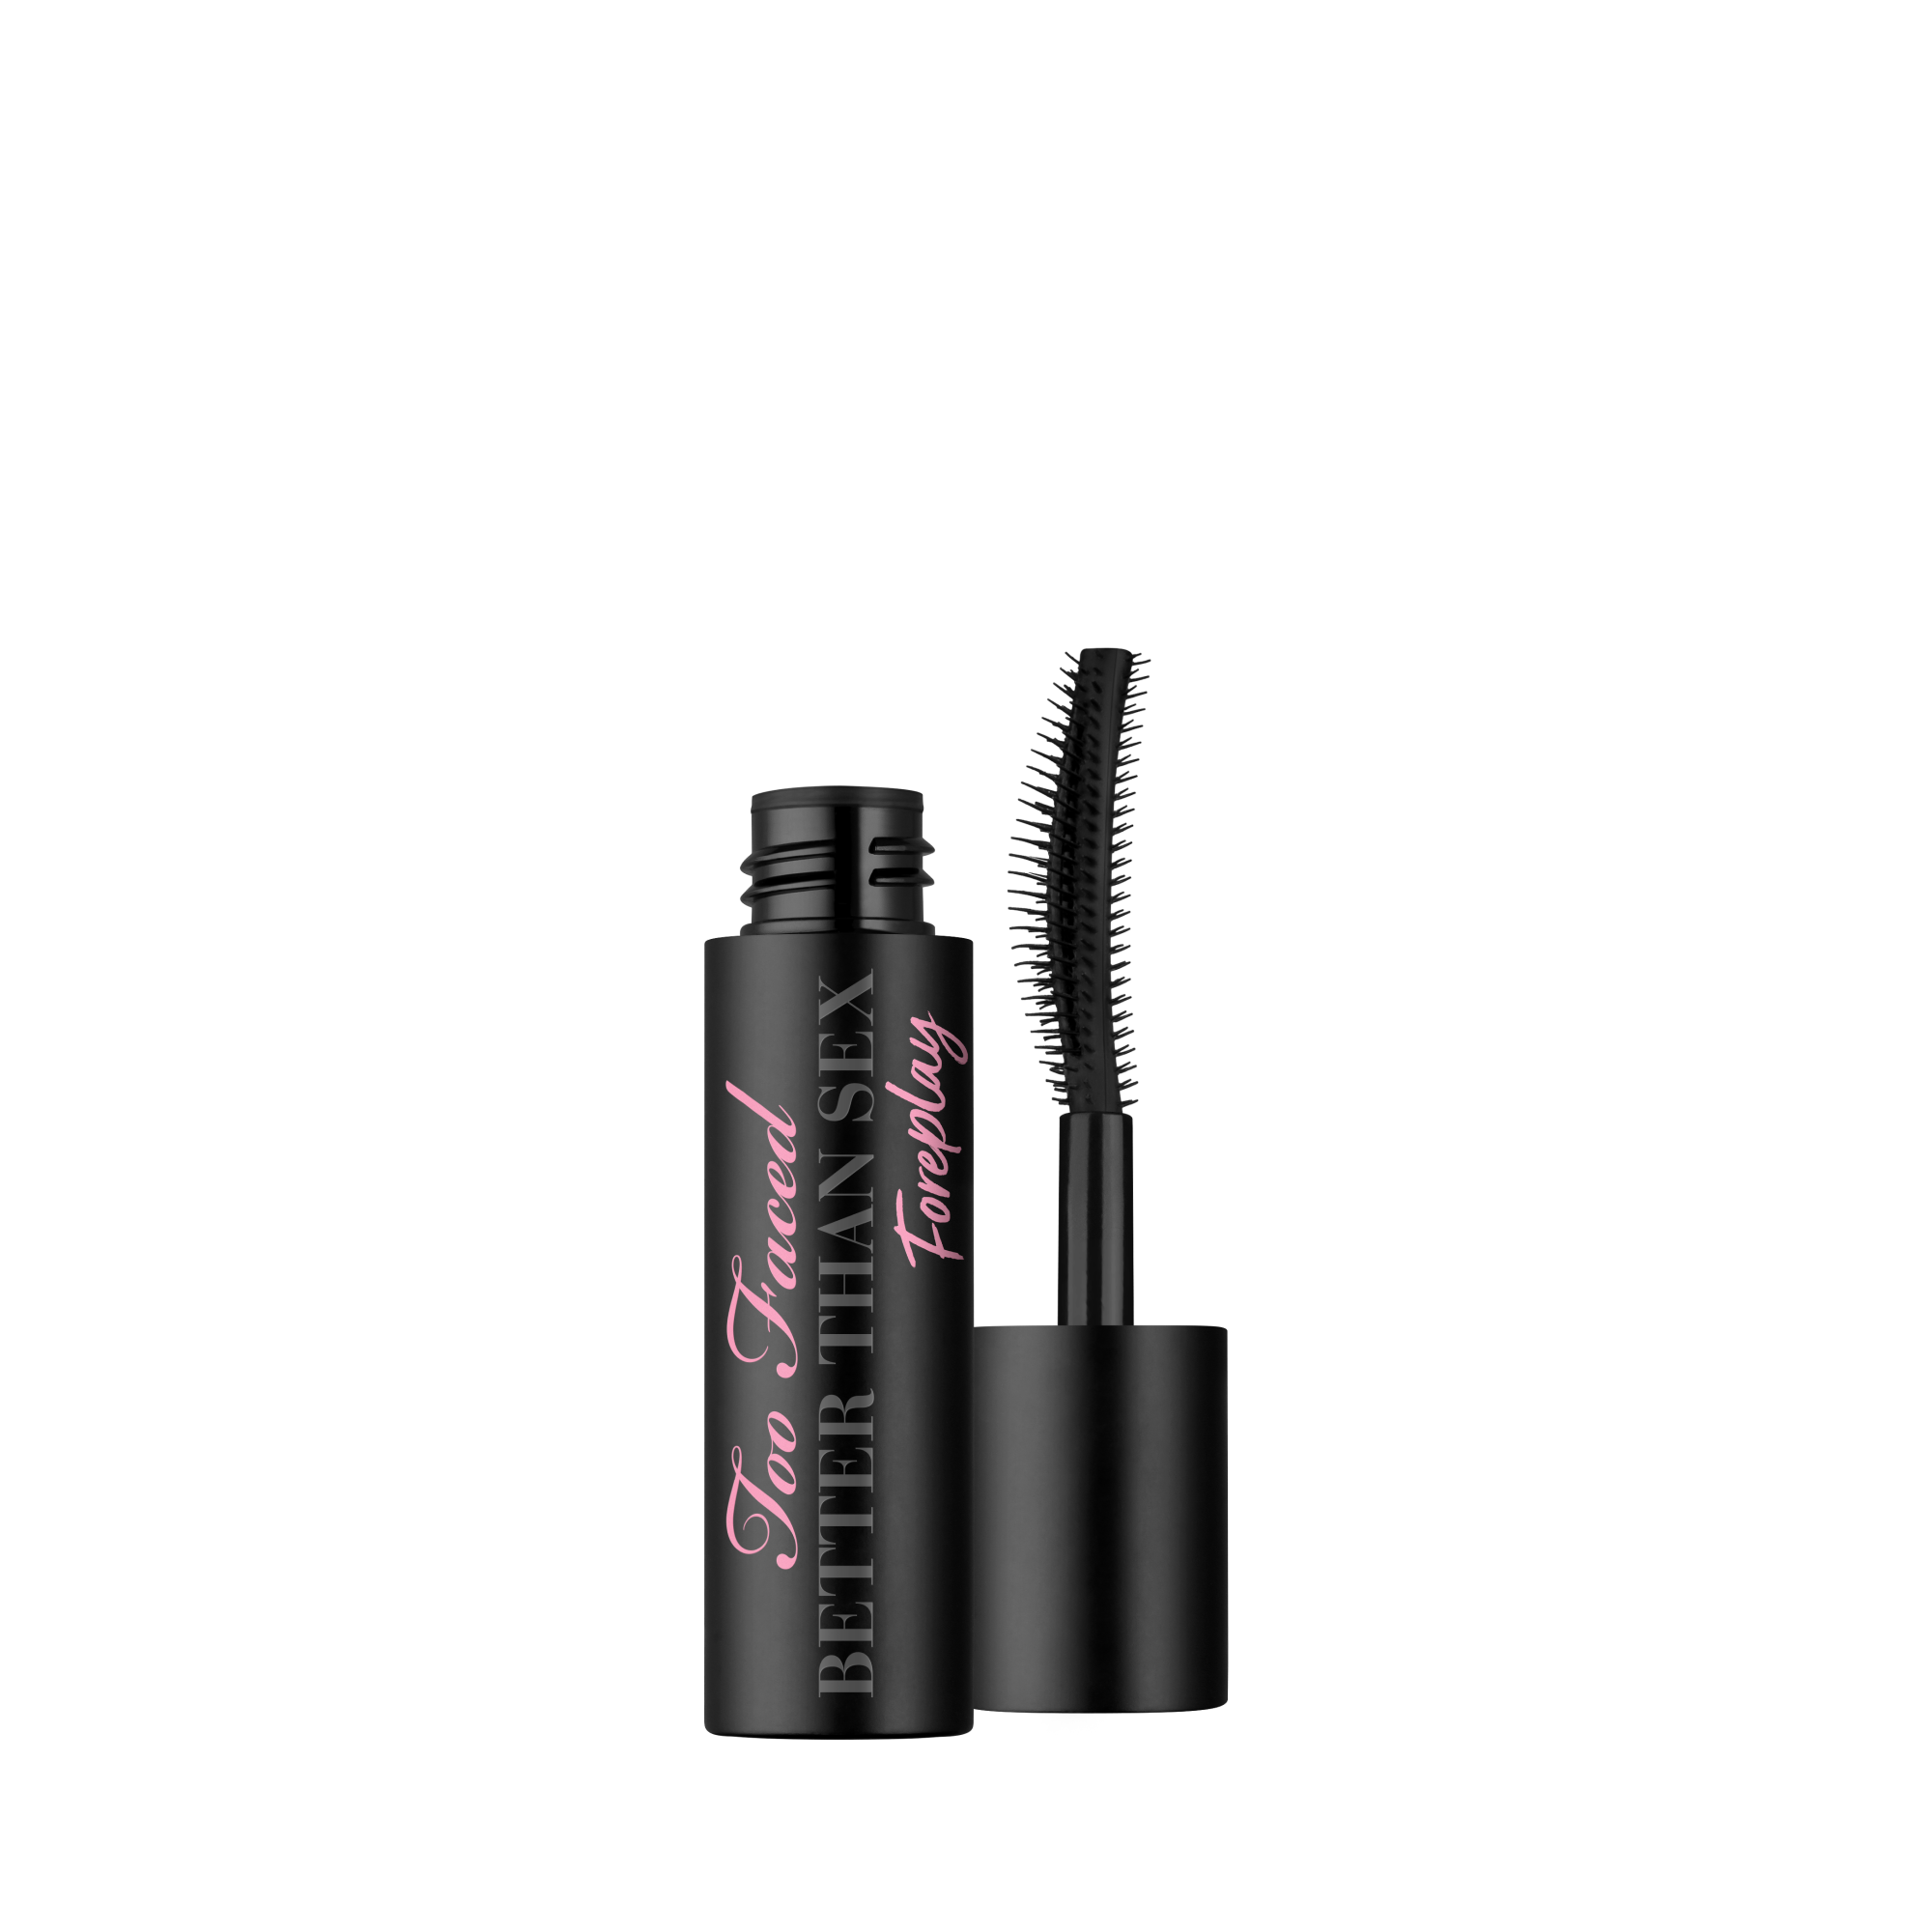 Deluxe Better Than Sex Foreplay Mascara Primer Toofaced 